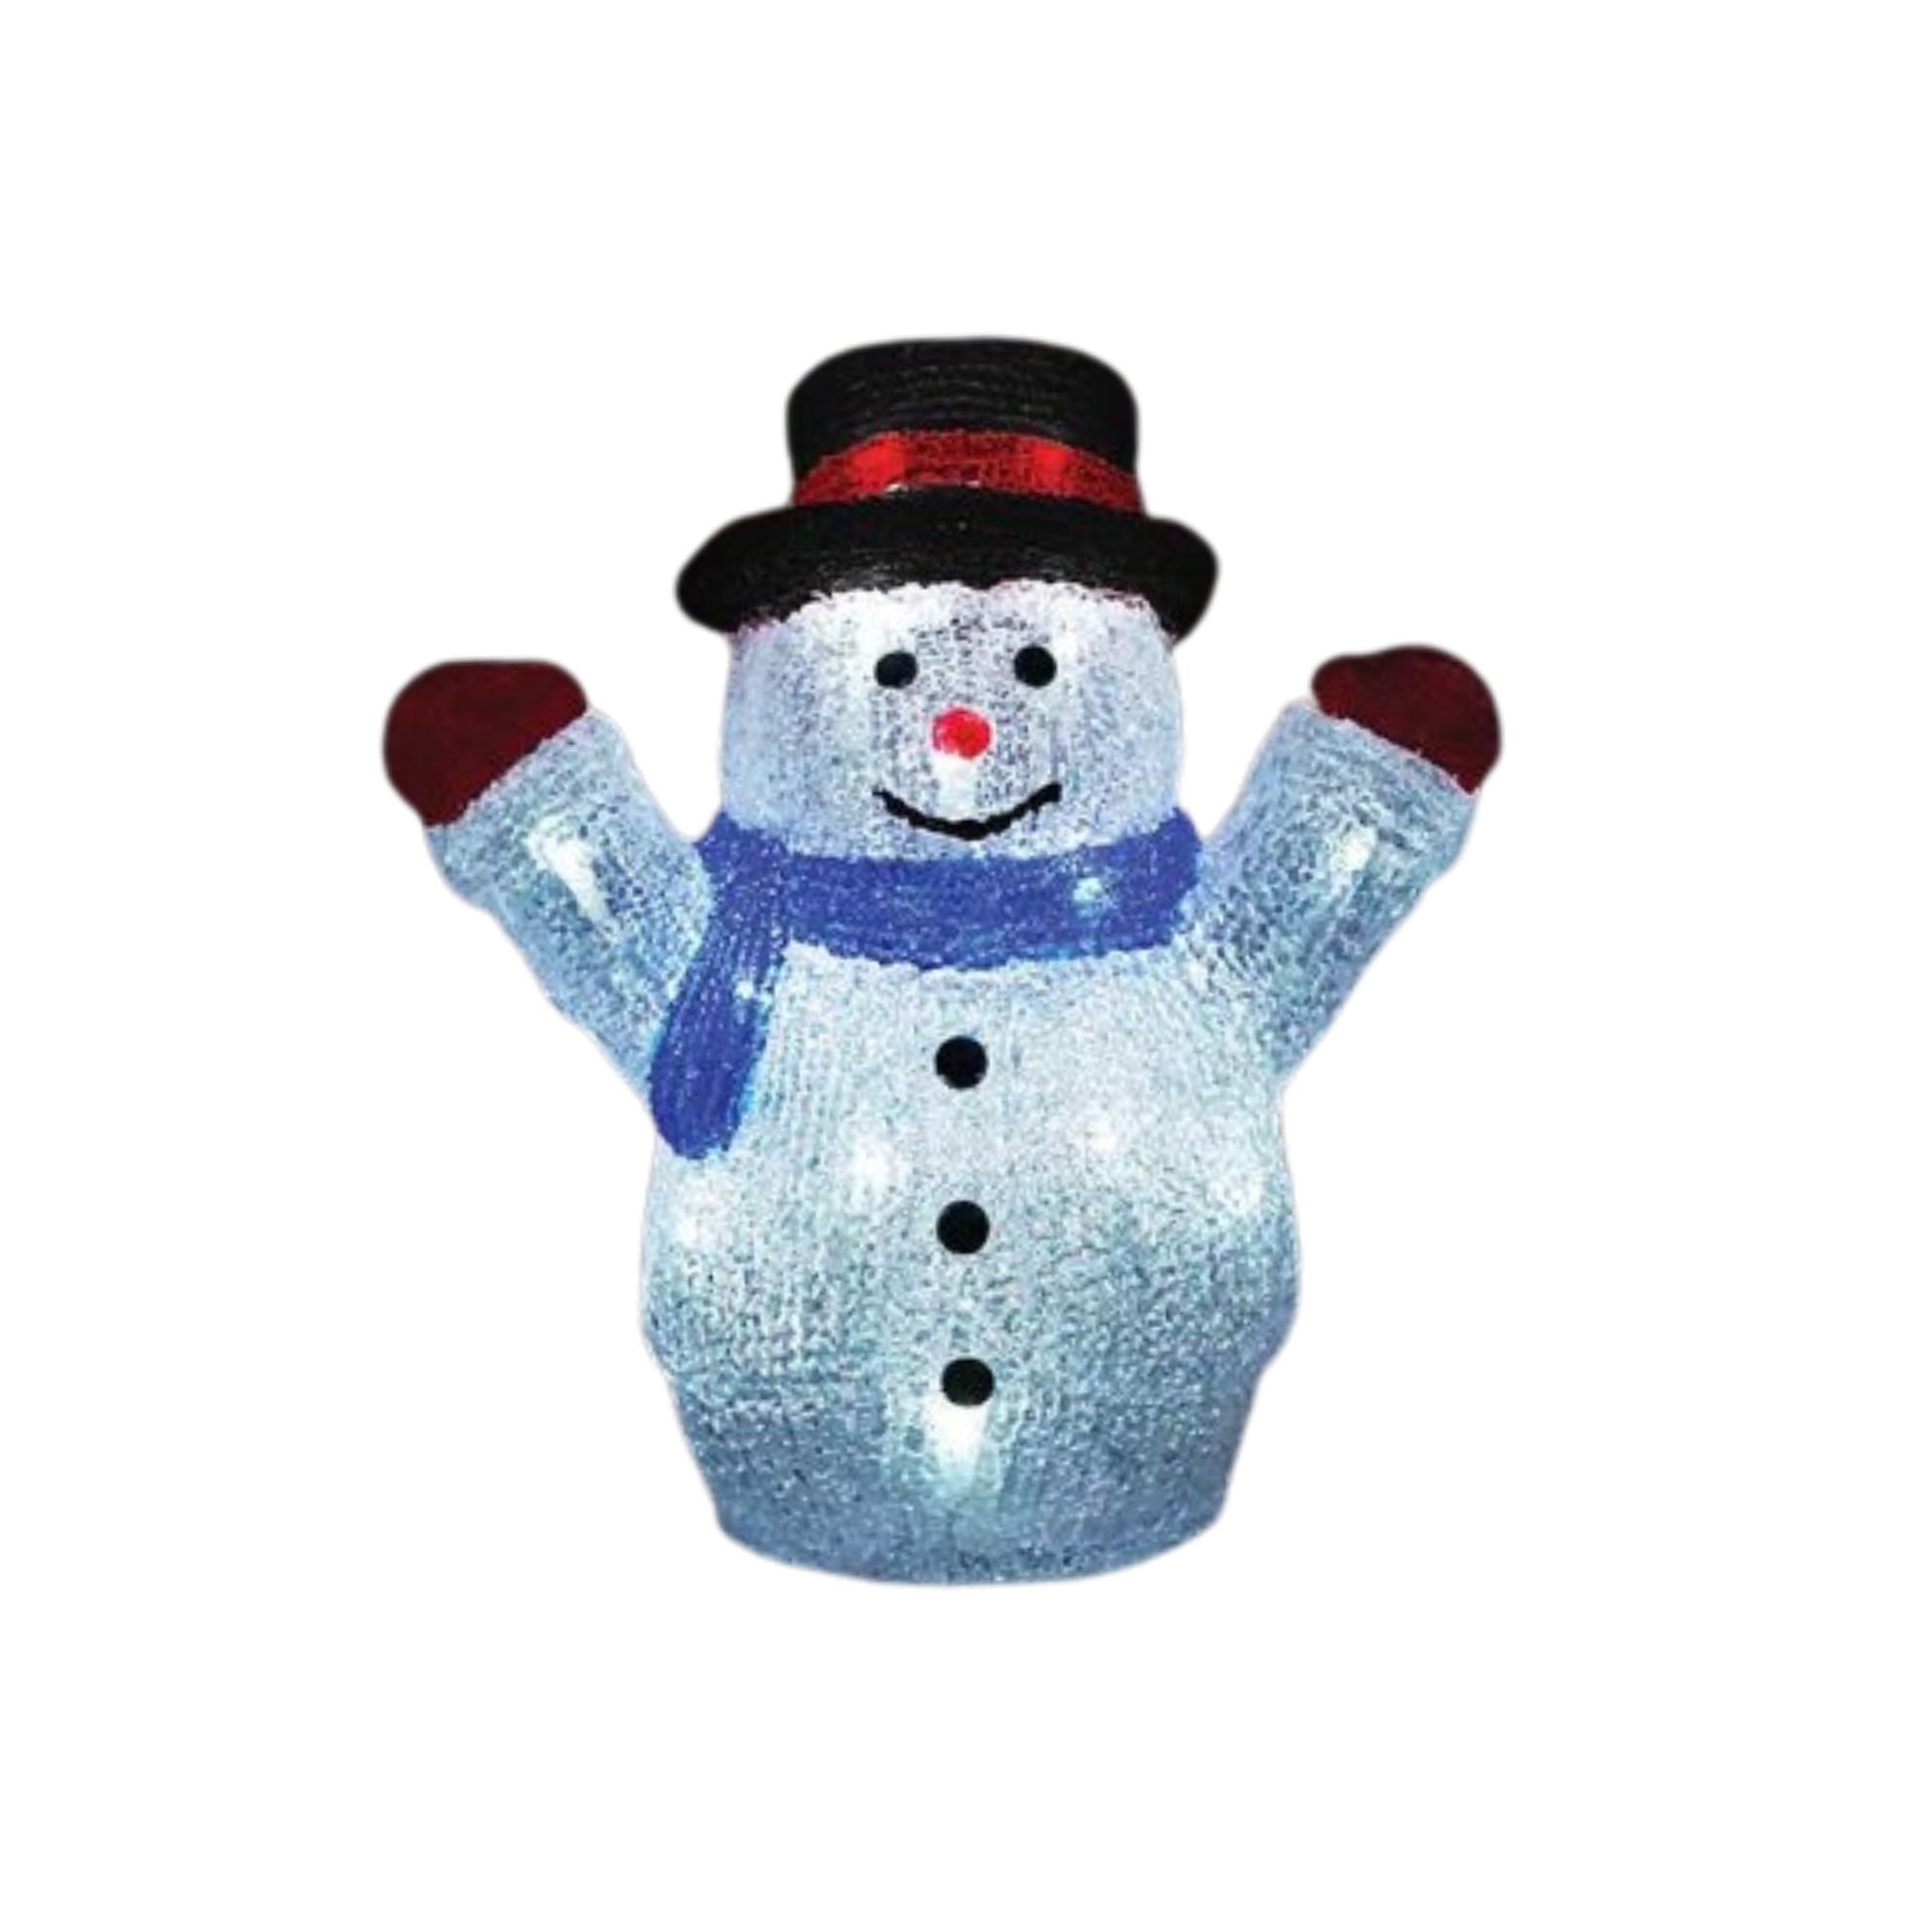 27cm Battery Operated LED Light up Acrylic Christmas Snowman Decoration